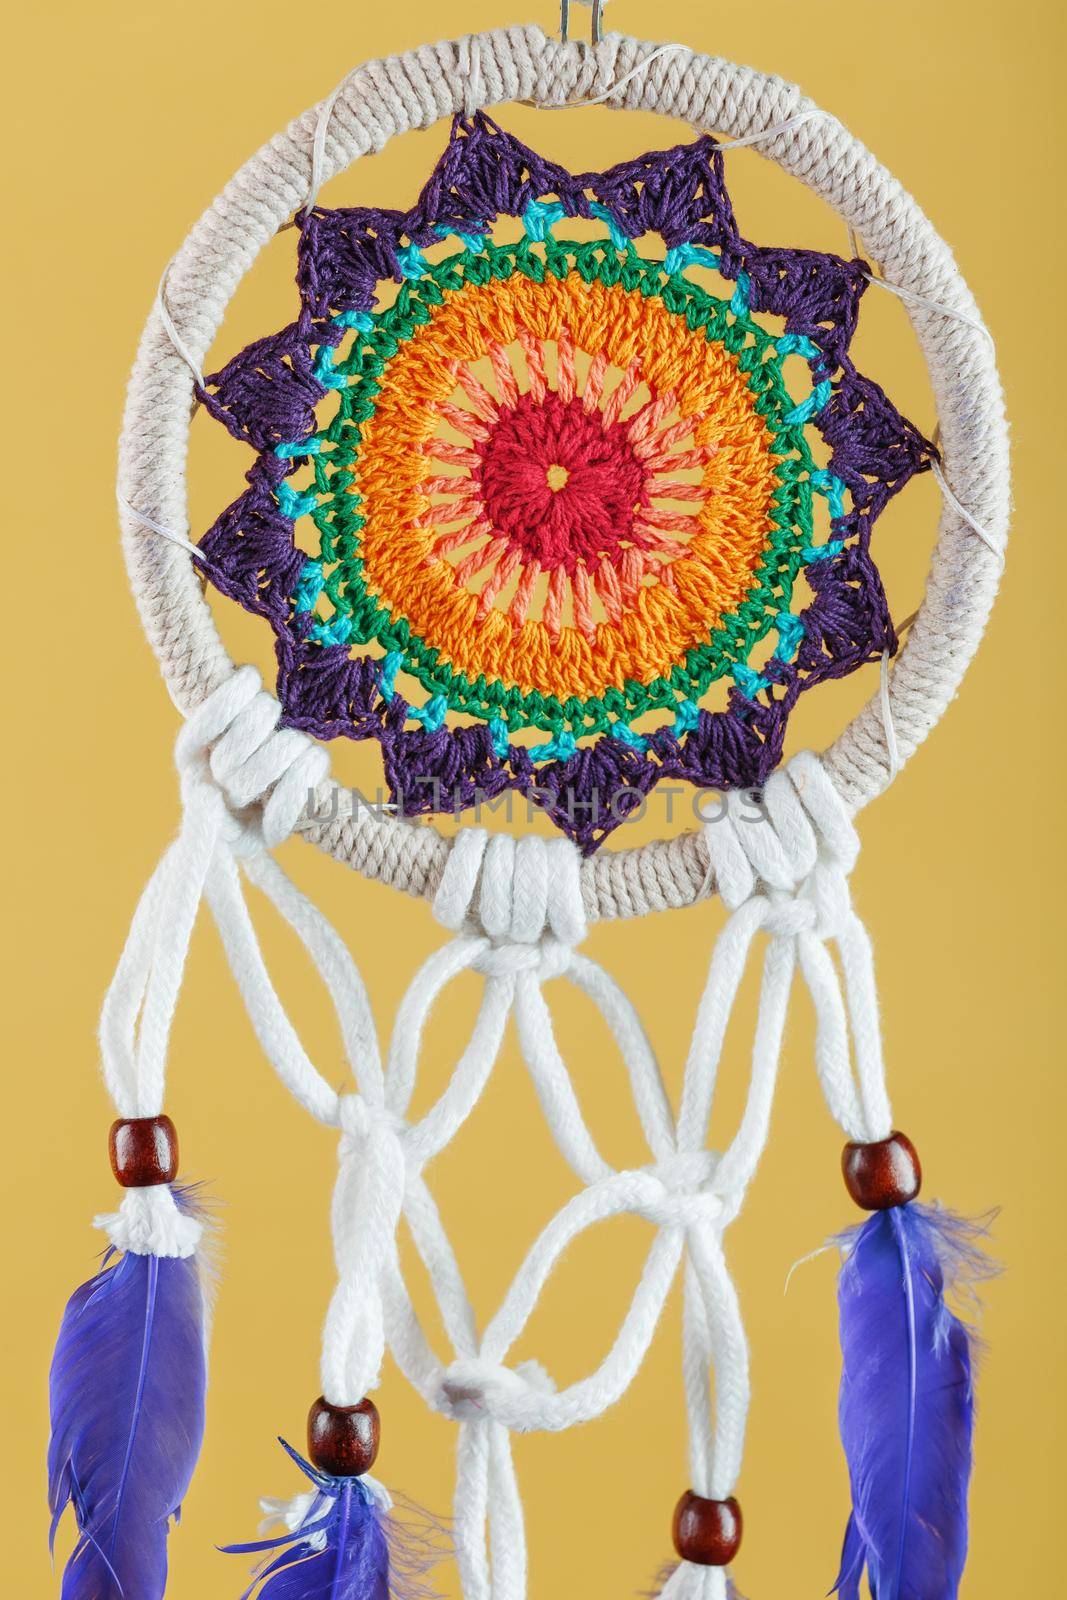 Amulet Dreamcatcher on a yellow background close-up protecting the sleeper by AlexGrec